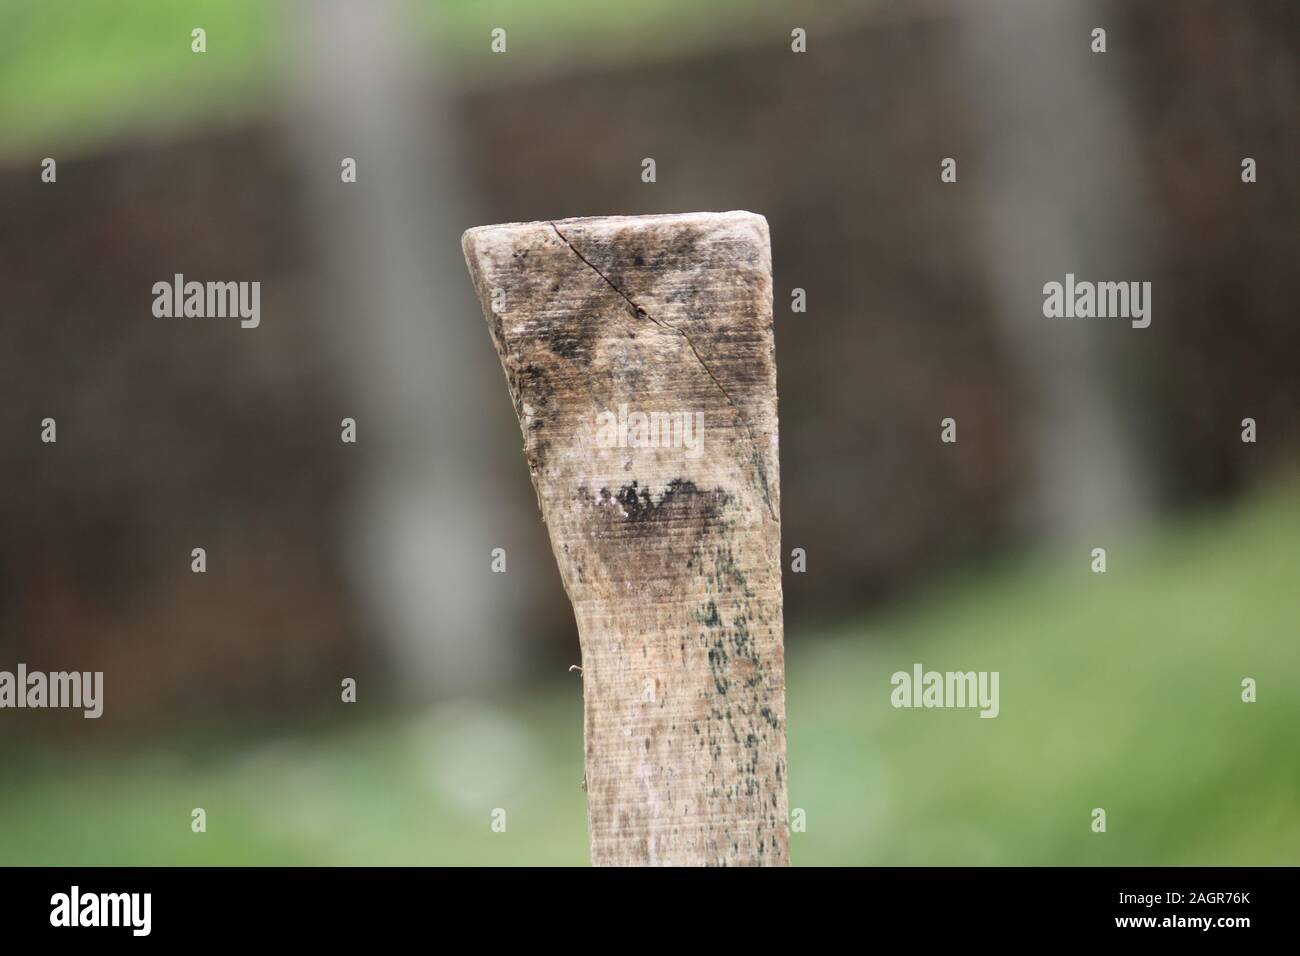 This photo shows nature, there is a wooden stick in it, that too full blure Stock Photo